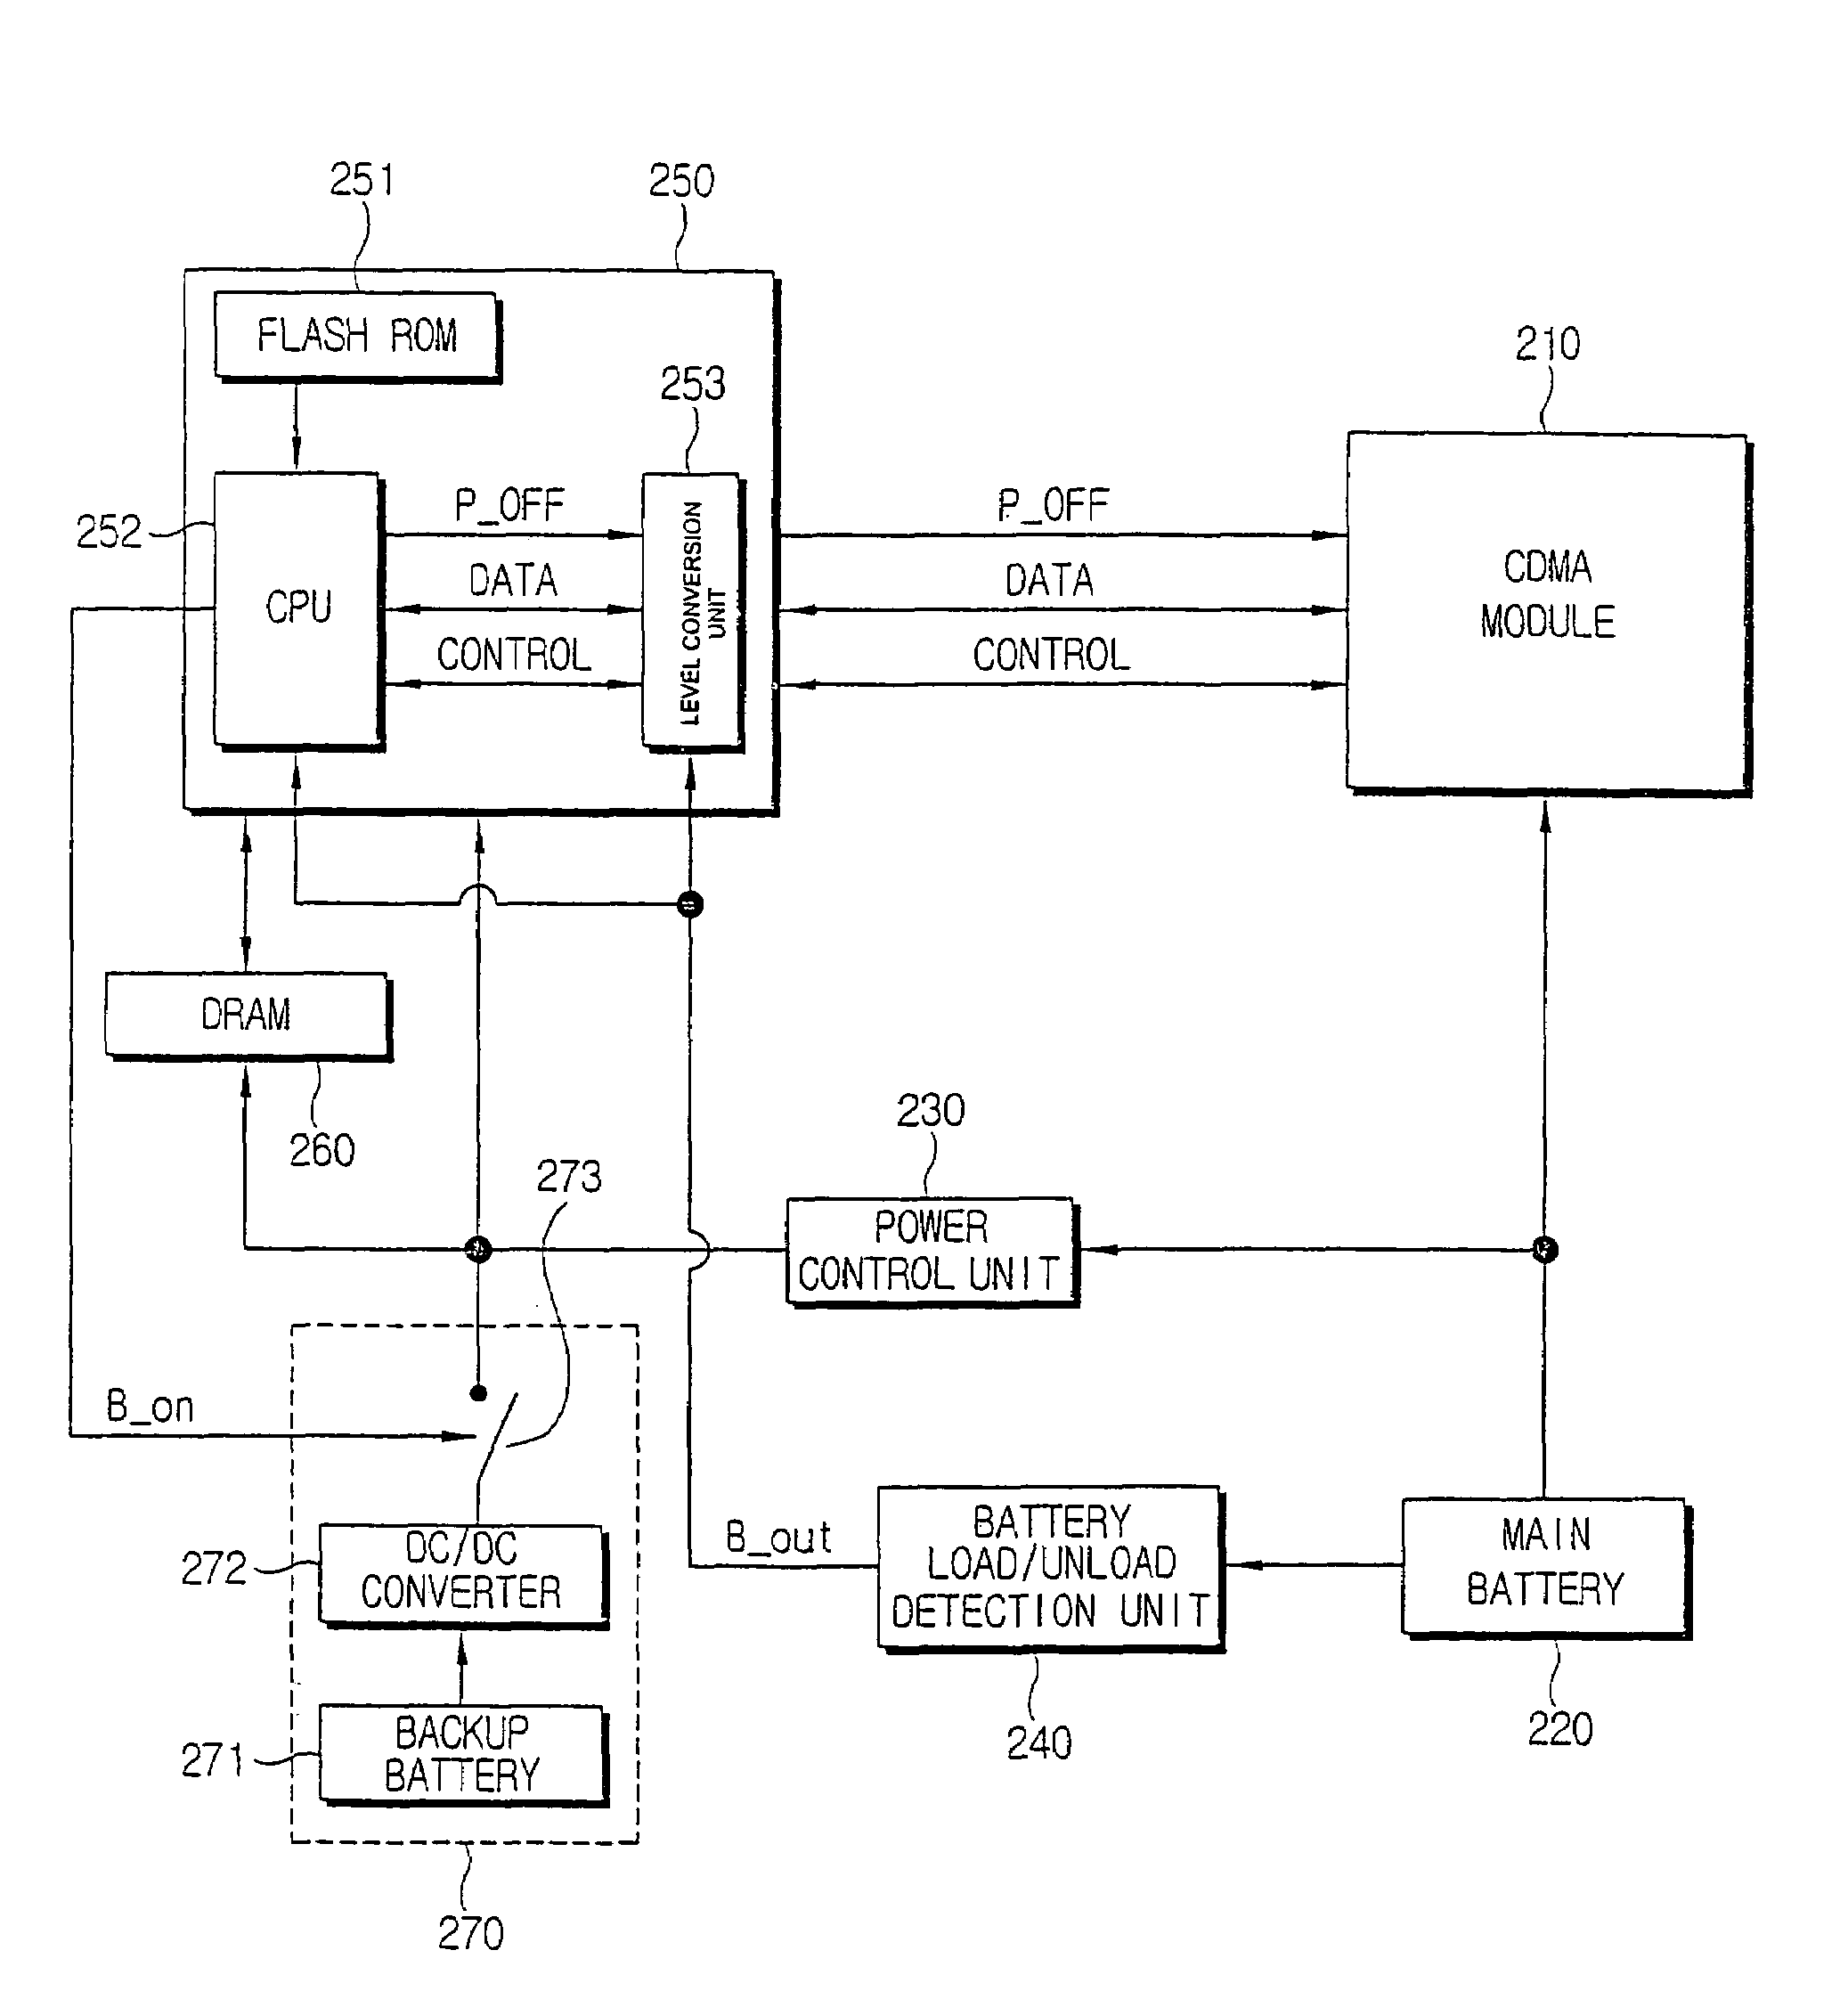 Mobile device having an overcurrent cutoff function